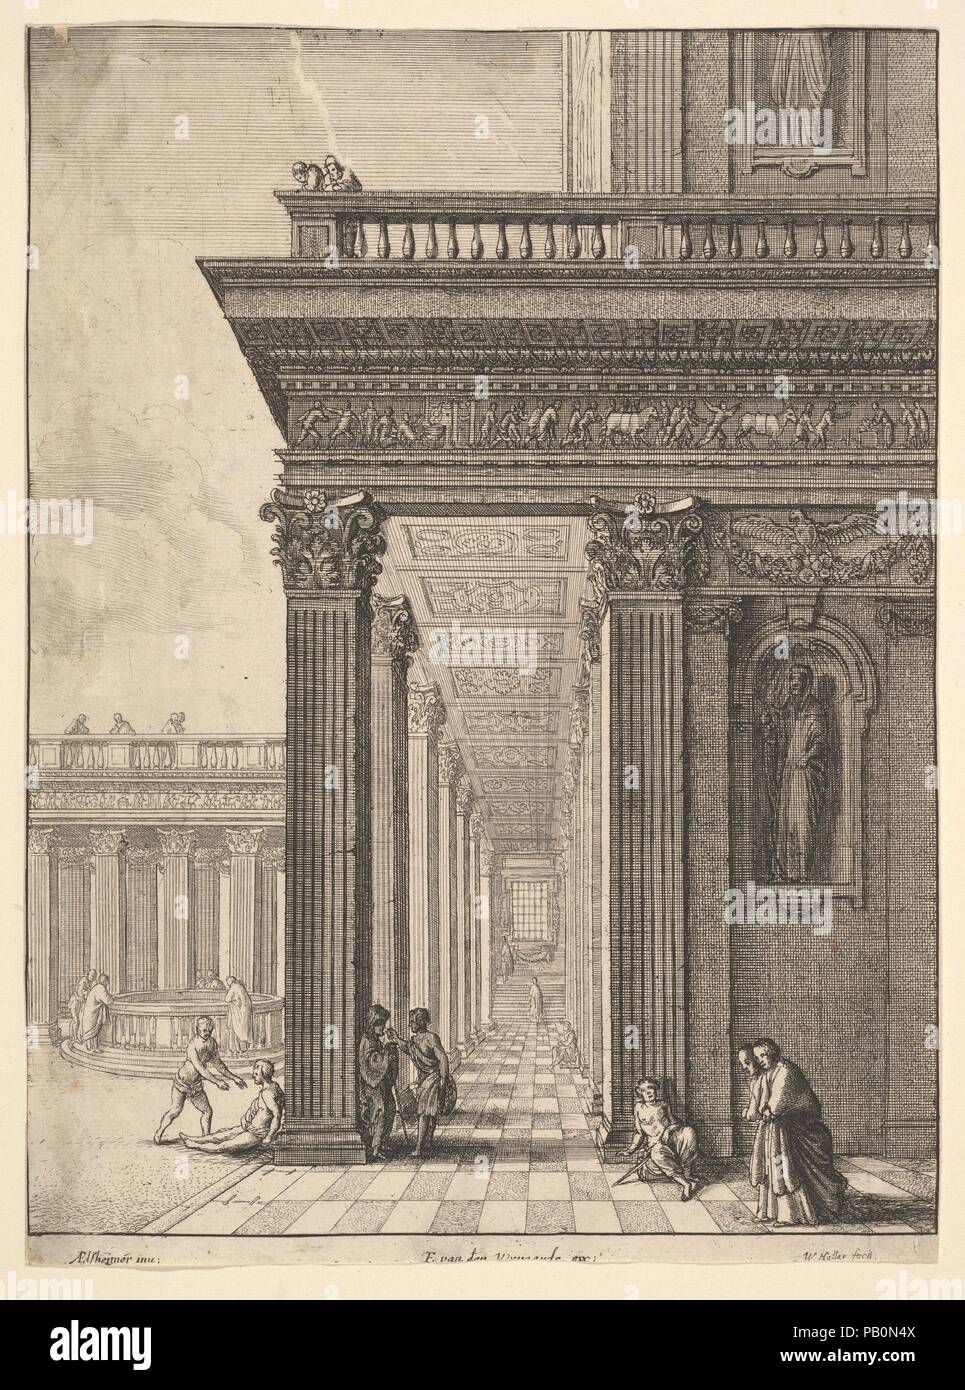 Temple courtyard with figures, after David Teniers the Elder (?). Artist: after Adam Elsheimer (German, Frankfurt 1578-1610 Rome); Wenceslaus Hollar (Bohemian, Prague 1607-1677 London). Dimensions: Sheet: 8 11/16 × 6 7/16 in. (22 × 16.3 cm). Date: 1625-77.  Temple colonnade and courtyard, with walking, seated and conversing figures, some looking down a well at left. Museum: Metropolitan Museum of Art, New York, USA. Stock Photo